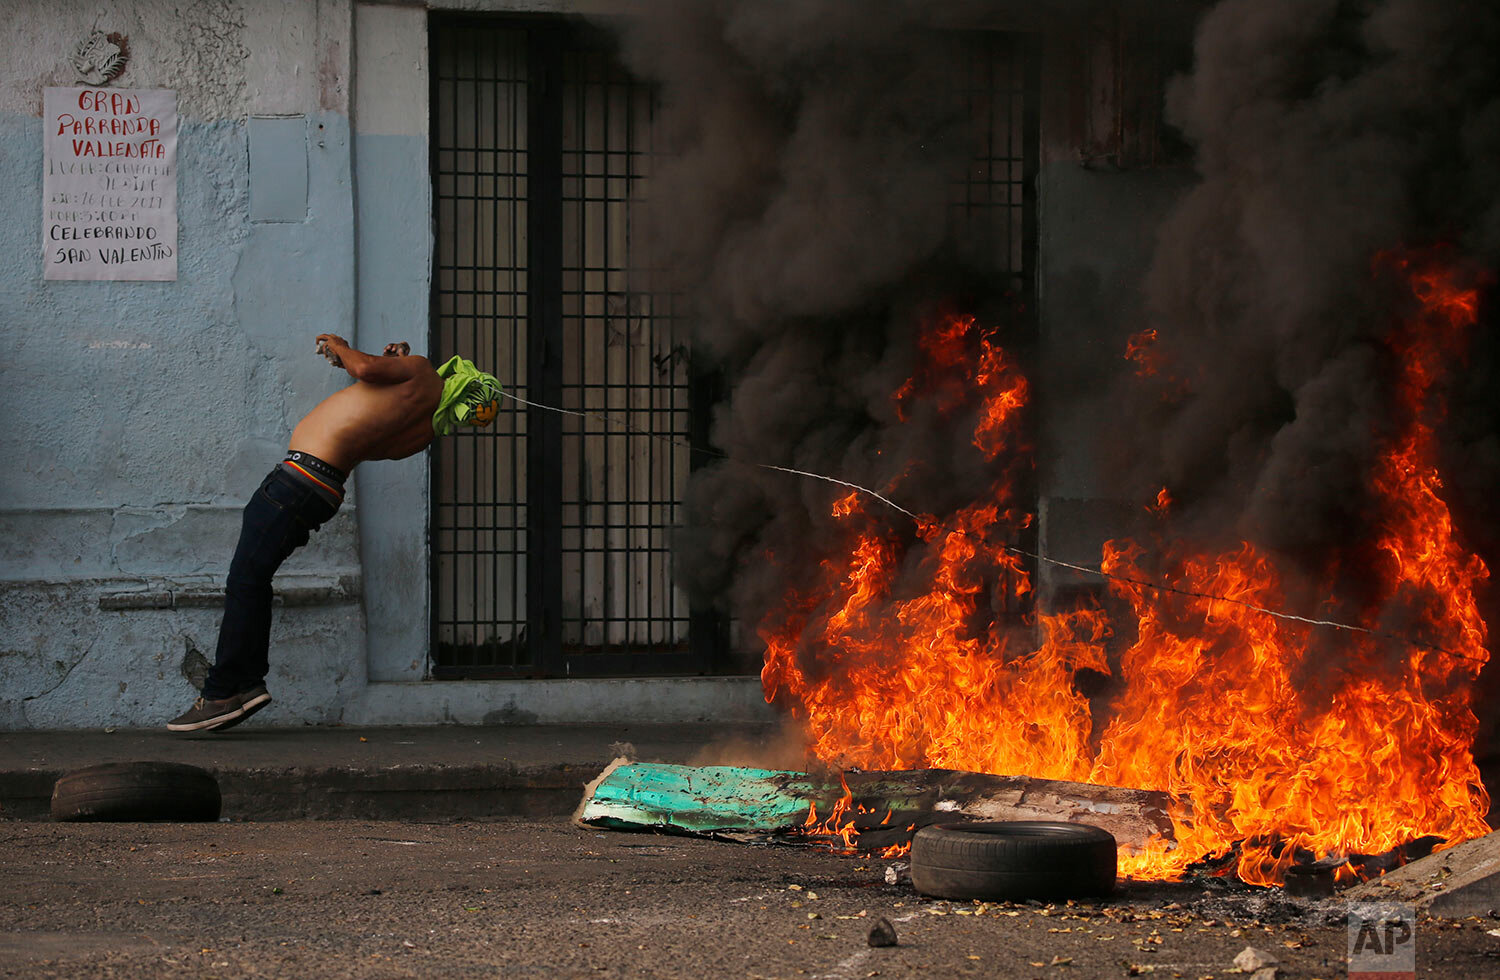  A demonstrator is knocked over by a strand of barbed wire during clashes with the Bolivarian National Guard in Urena, Venezuela, near the border with Colombia on Feb. 23, 2019. (AP Photo/Fernando Llano) 